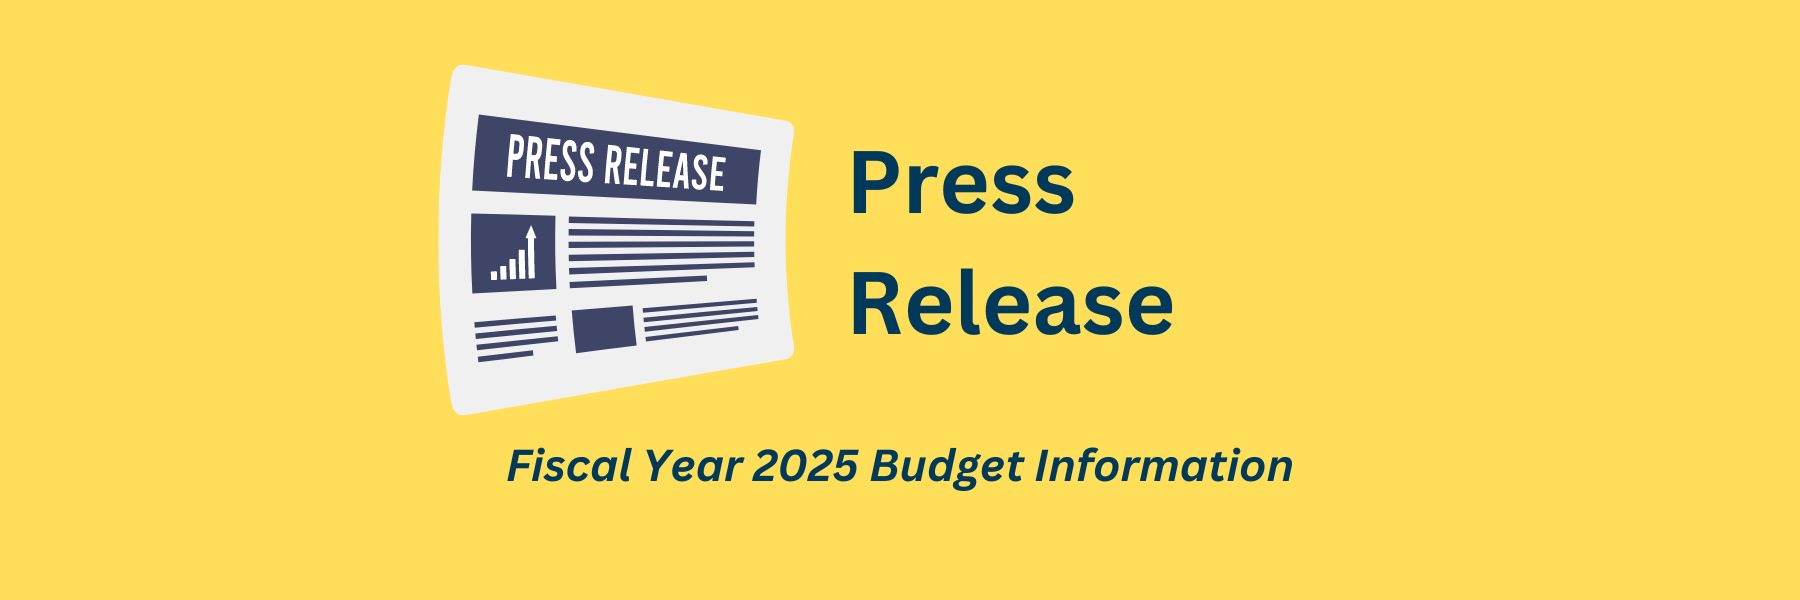 Fiscal Year 2025 Budget Information